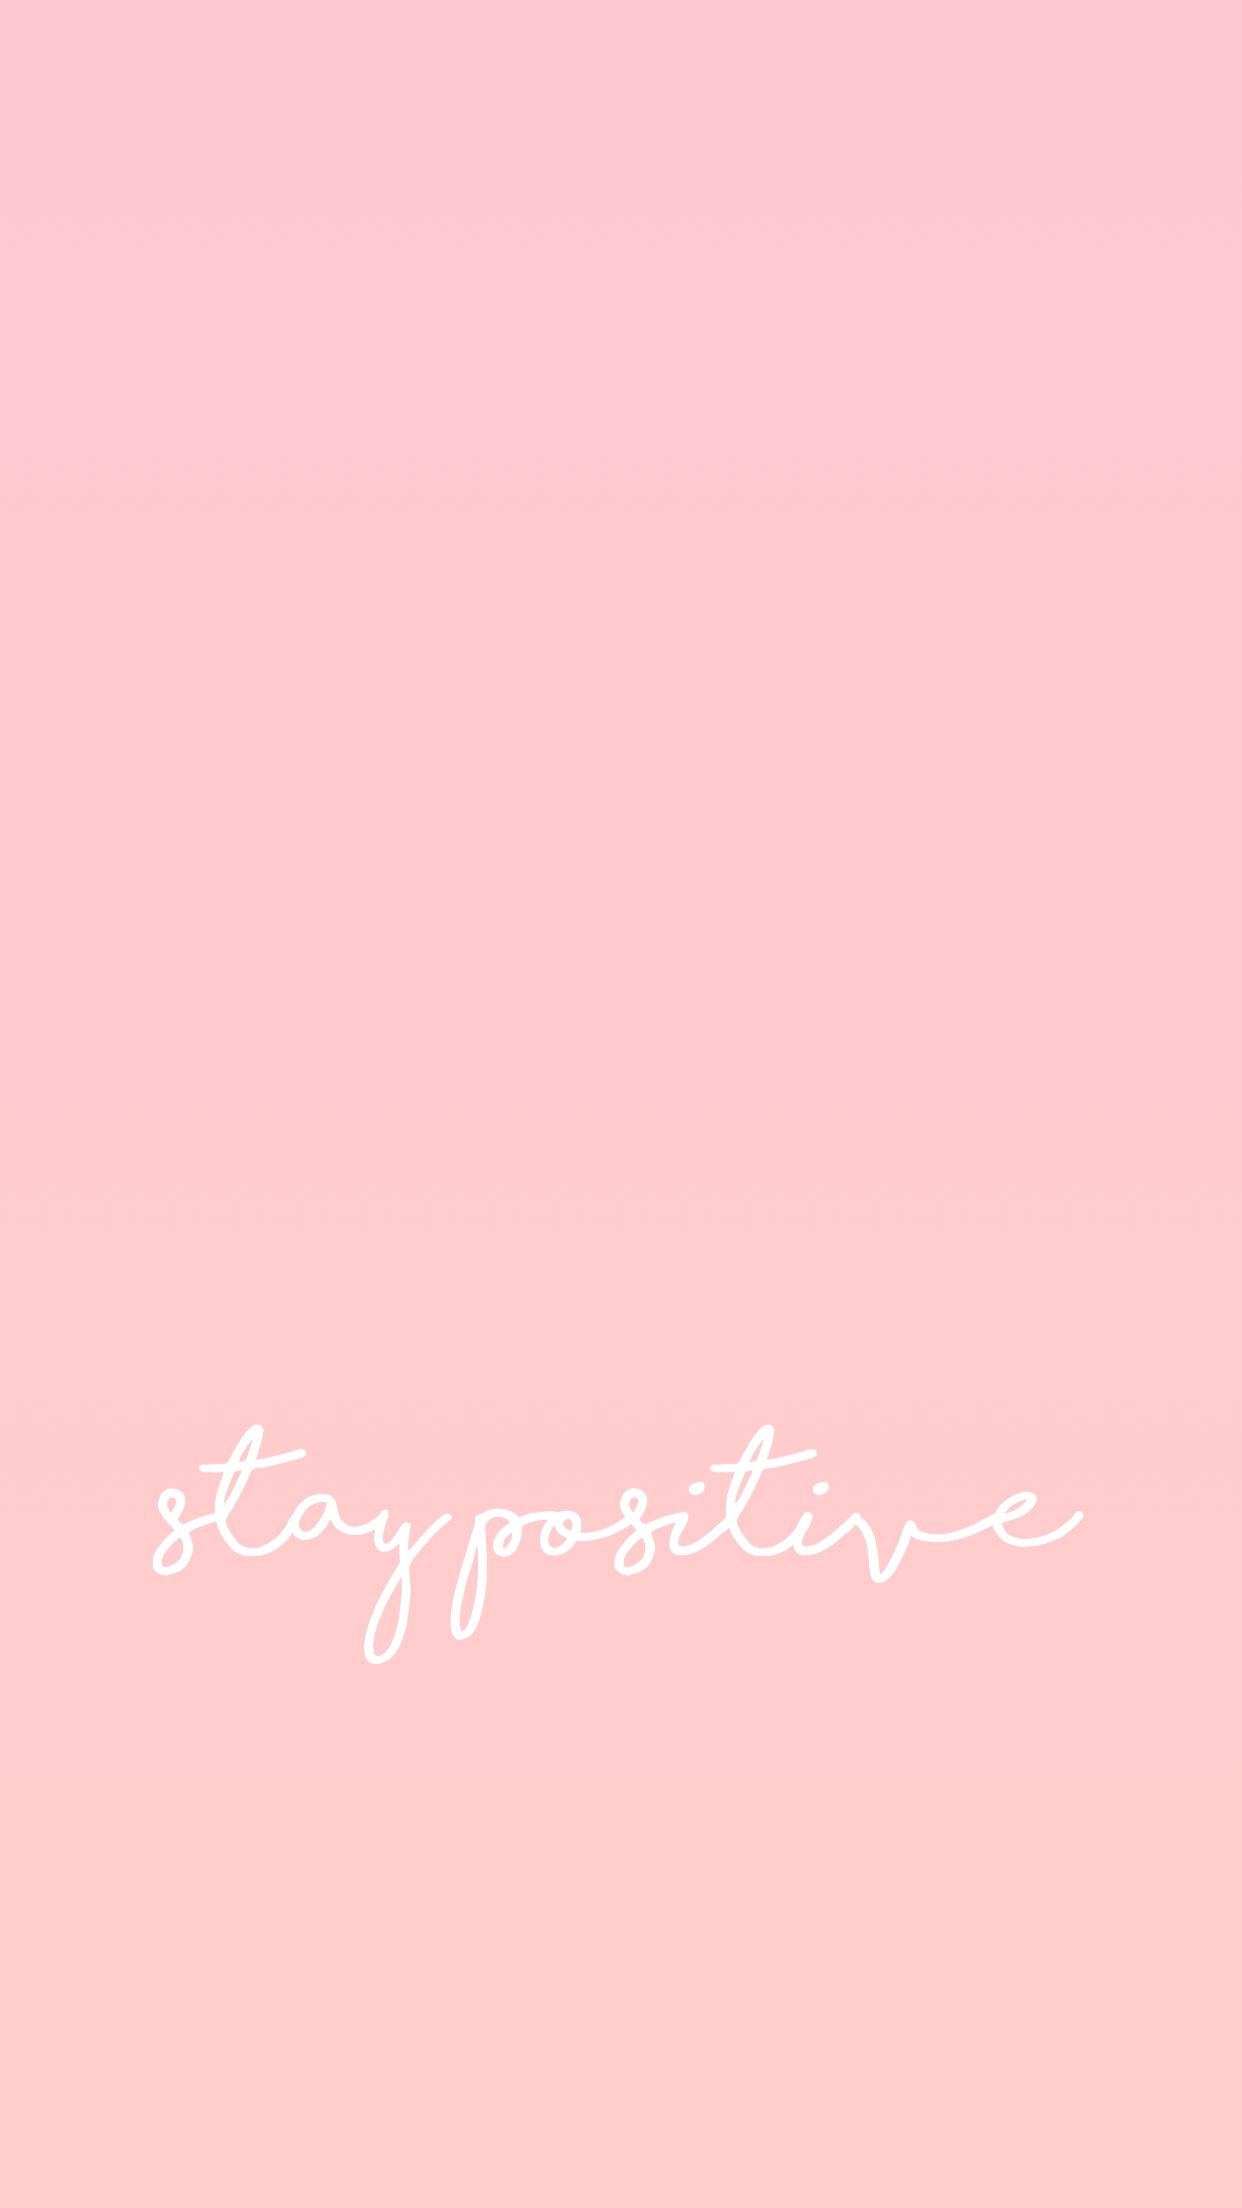 Stay positive - pink and white background - Positive